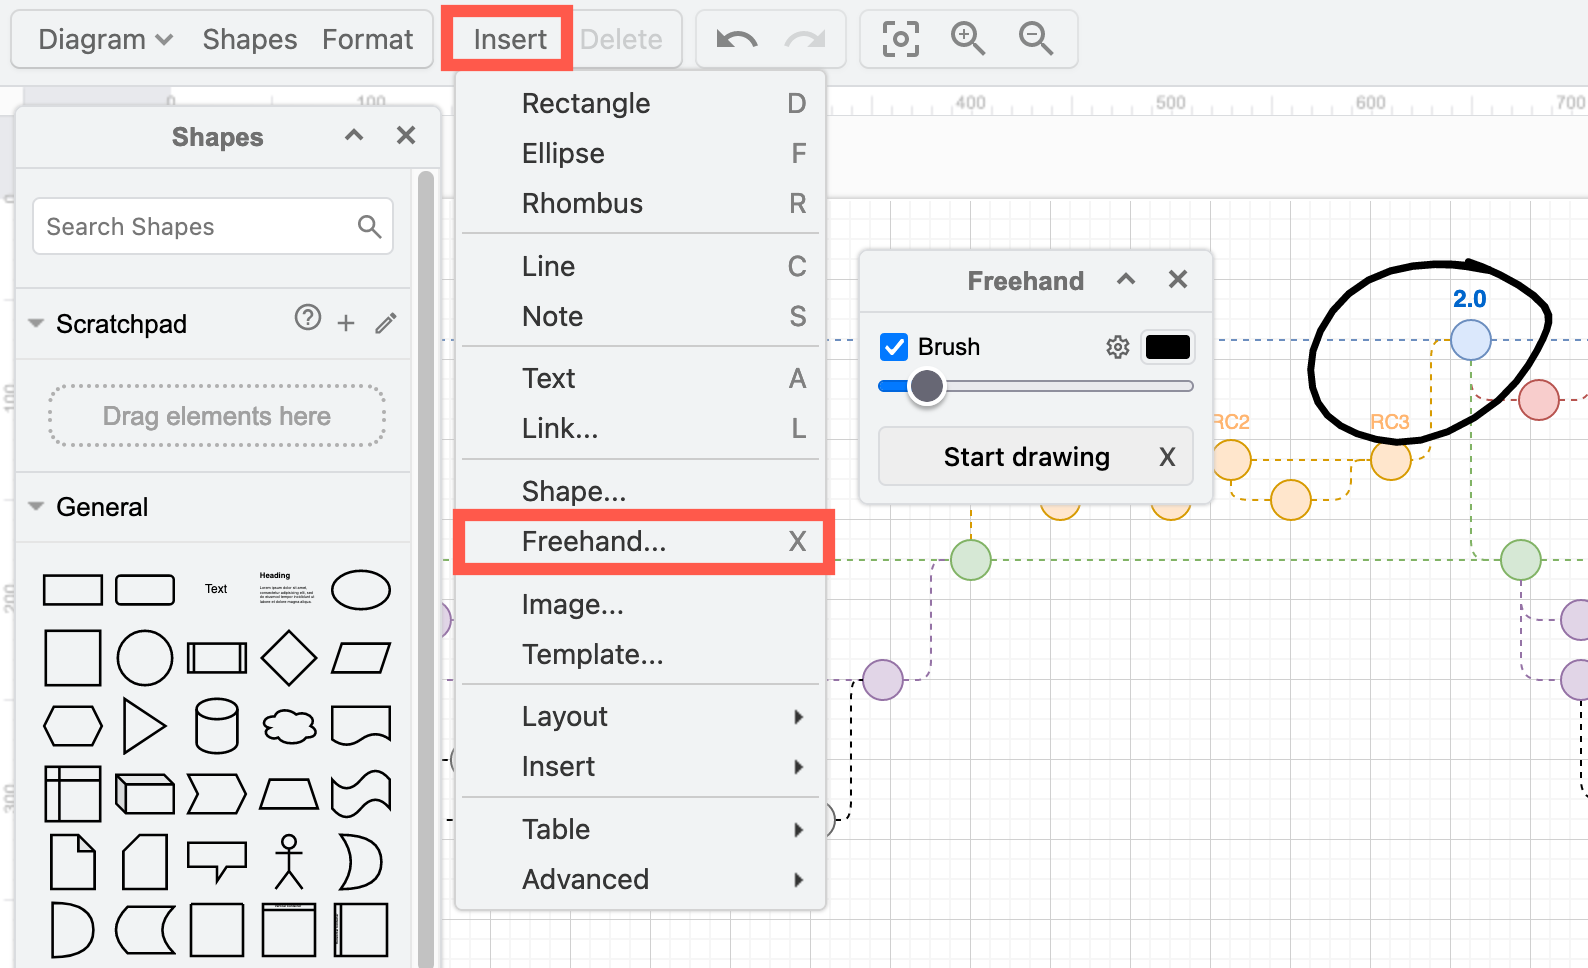 Click on Insert > Freehand to open the freehand drawing tool using the Minimal editor theme in draw.io